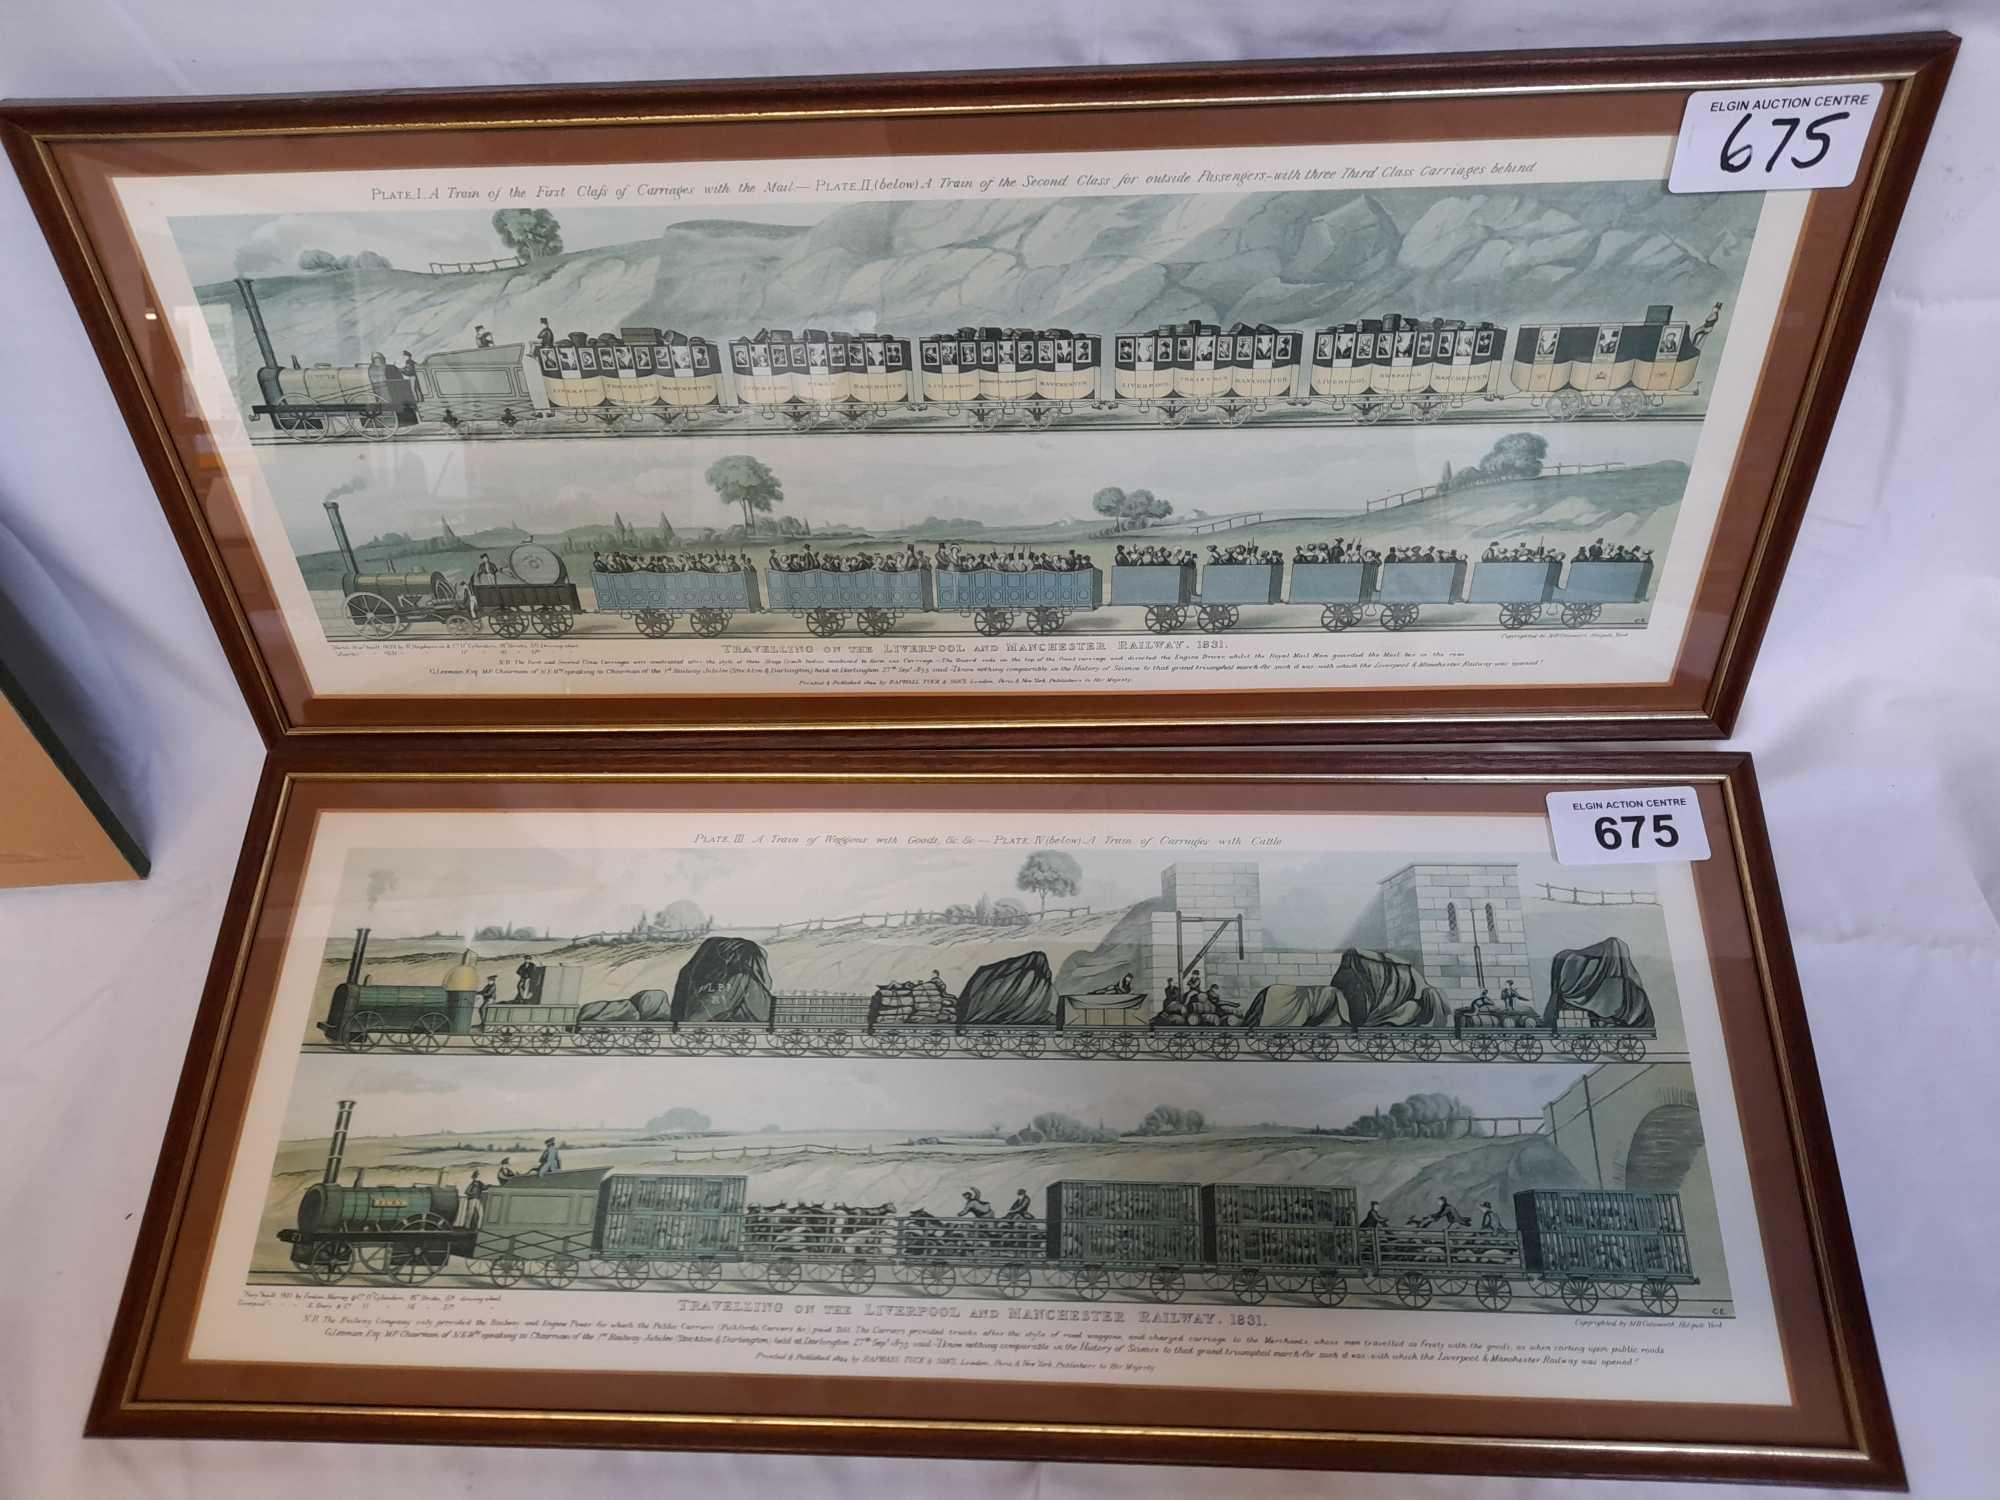 2 PRINTS LIVERPOOL & MANCHESTER RAILWAY 1831 - Image 6 of 6